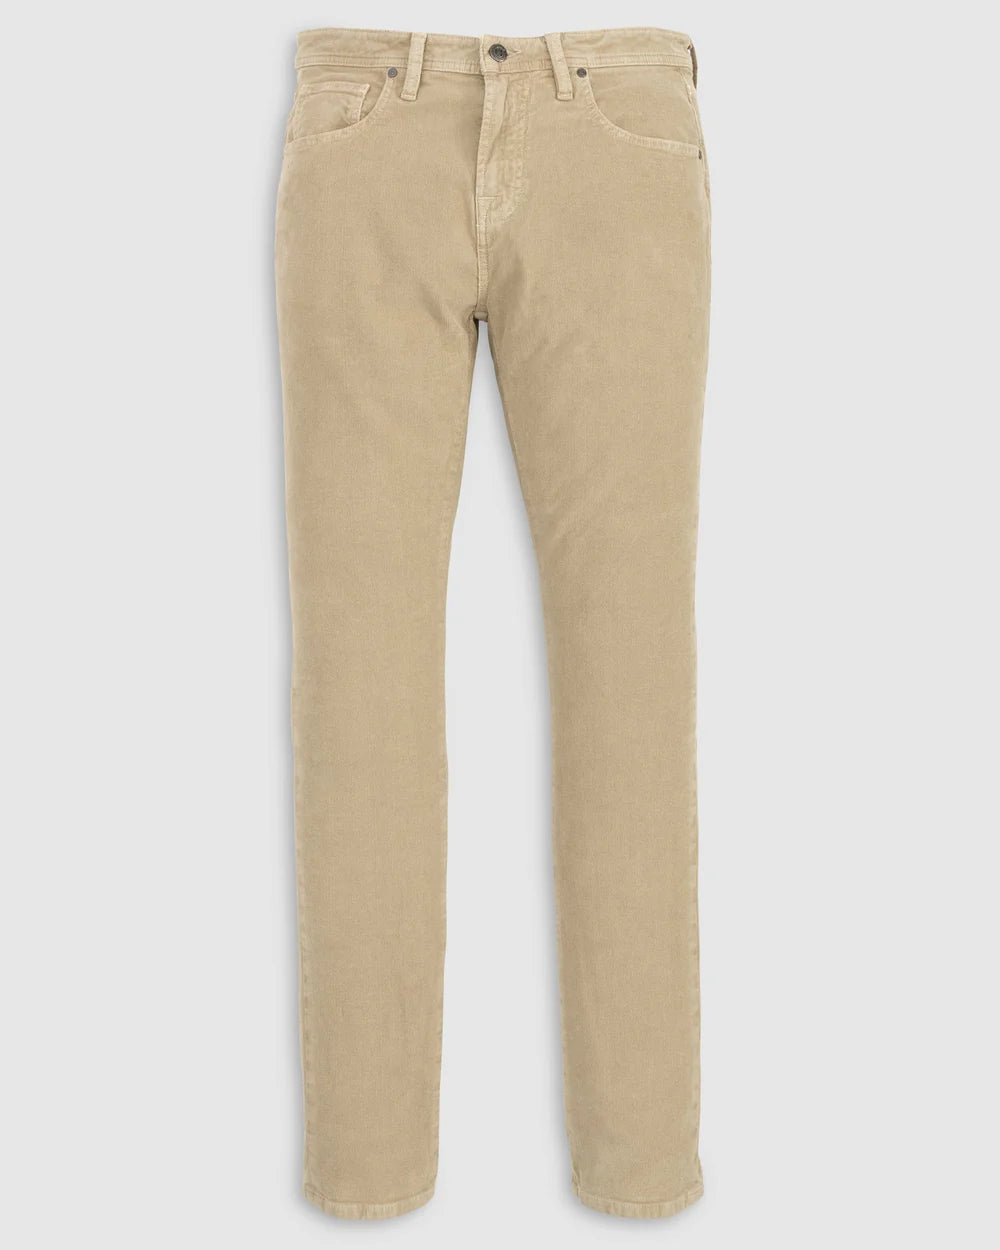 Jeans and Five Pocket Coffee R. Pants –